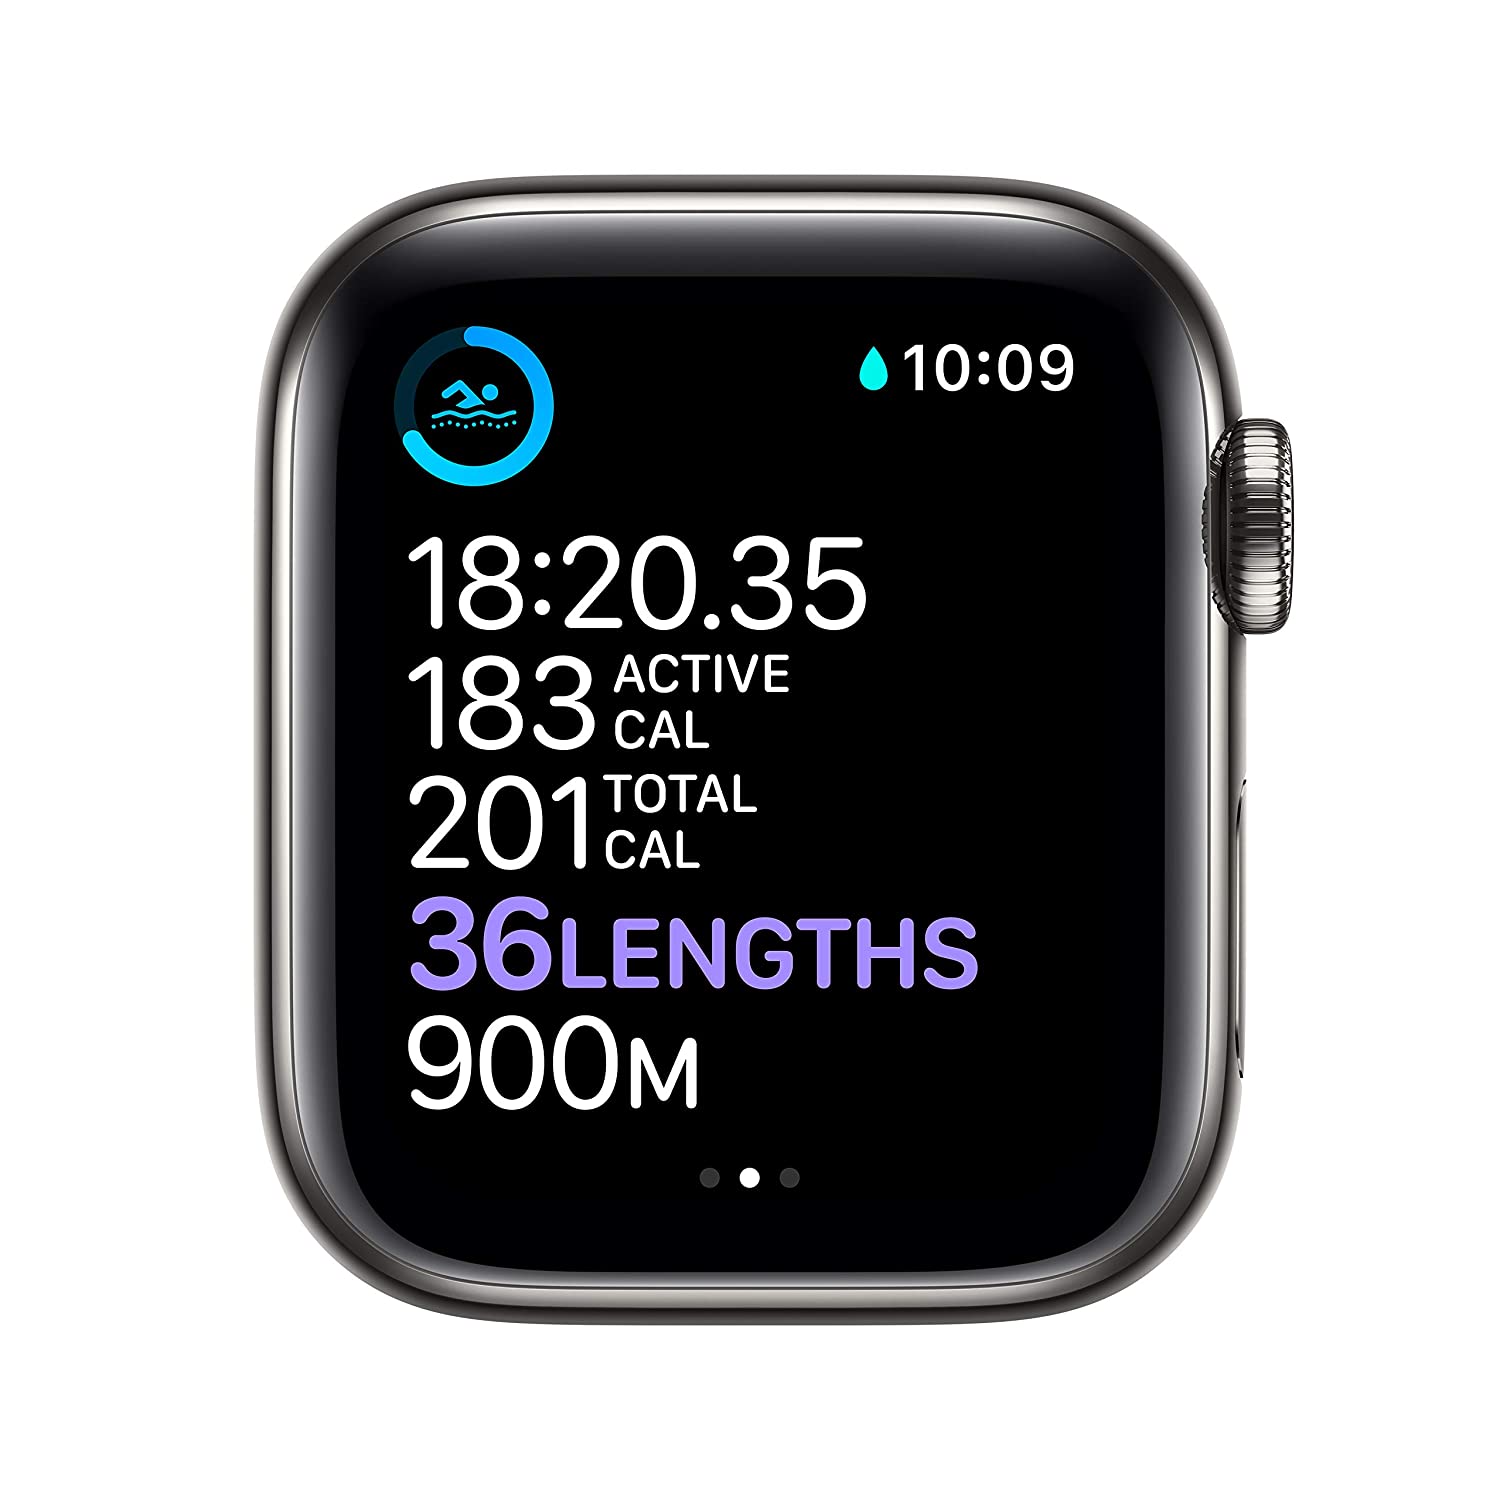 Latest Smart Watch Series 6 | Infinite Display | Logo Watch | Very High Quality BLACK | Compatible with Apple iPhone & Android devices